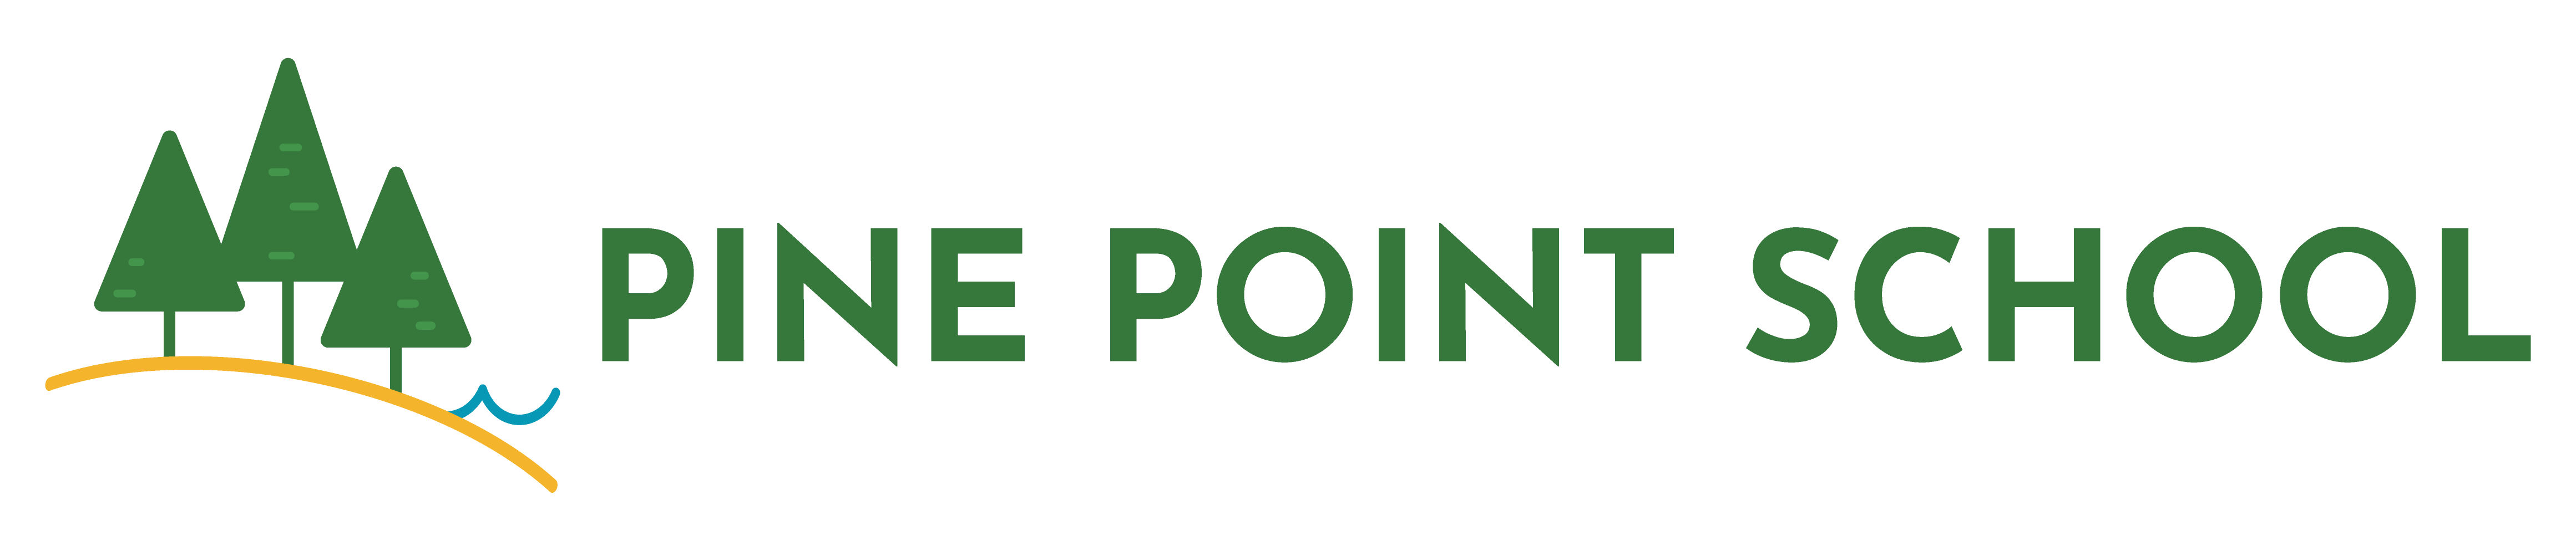 https://pinepoint.org/